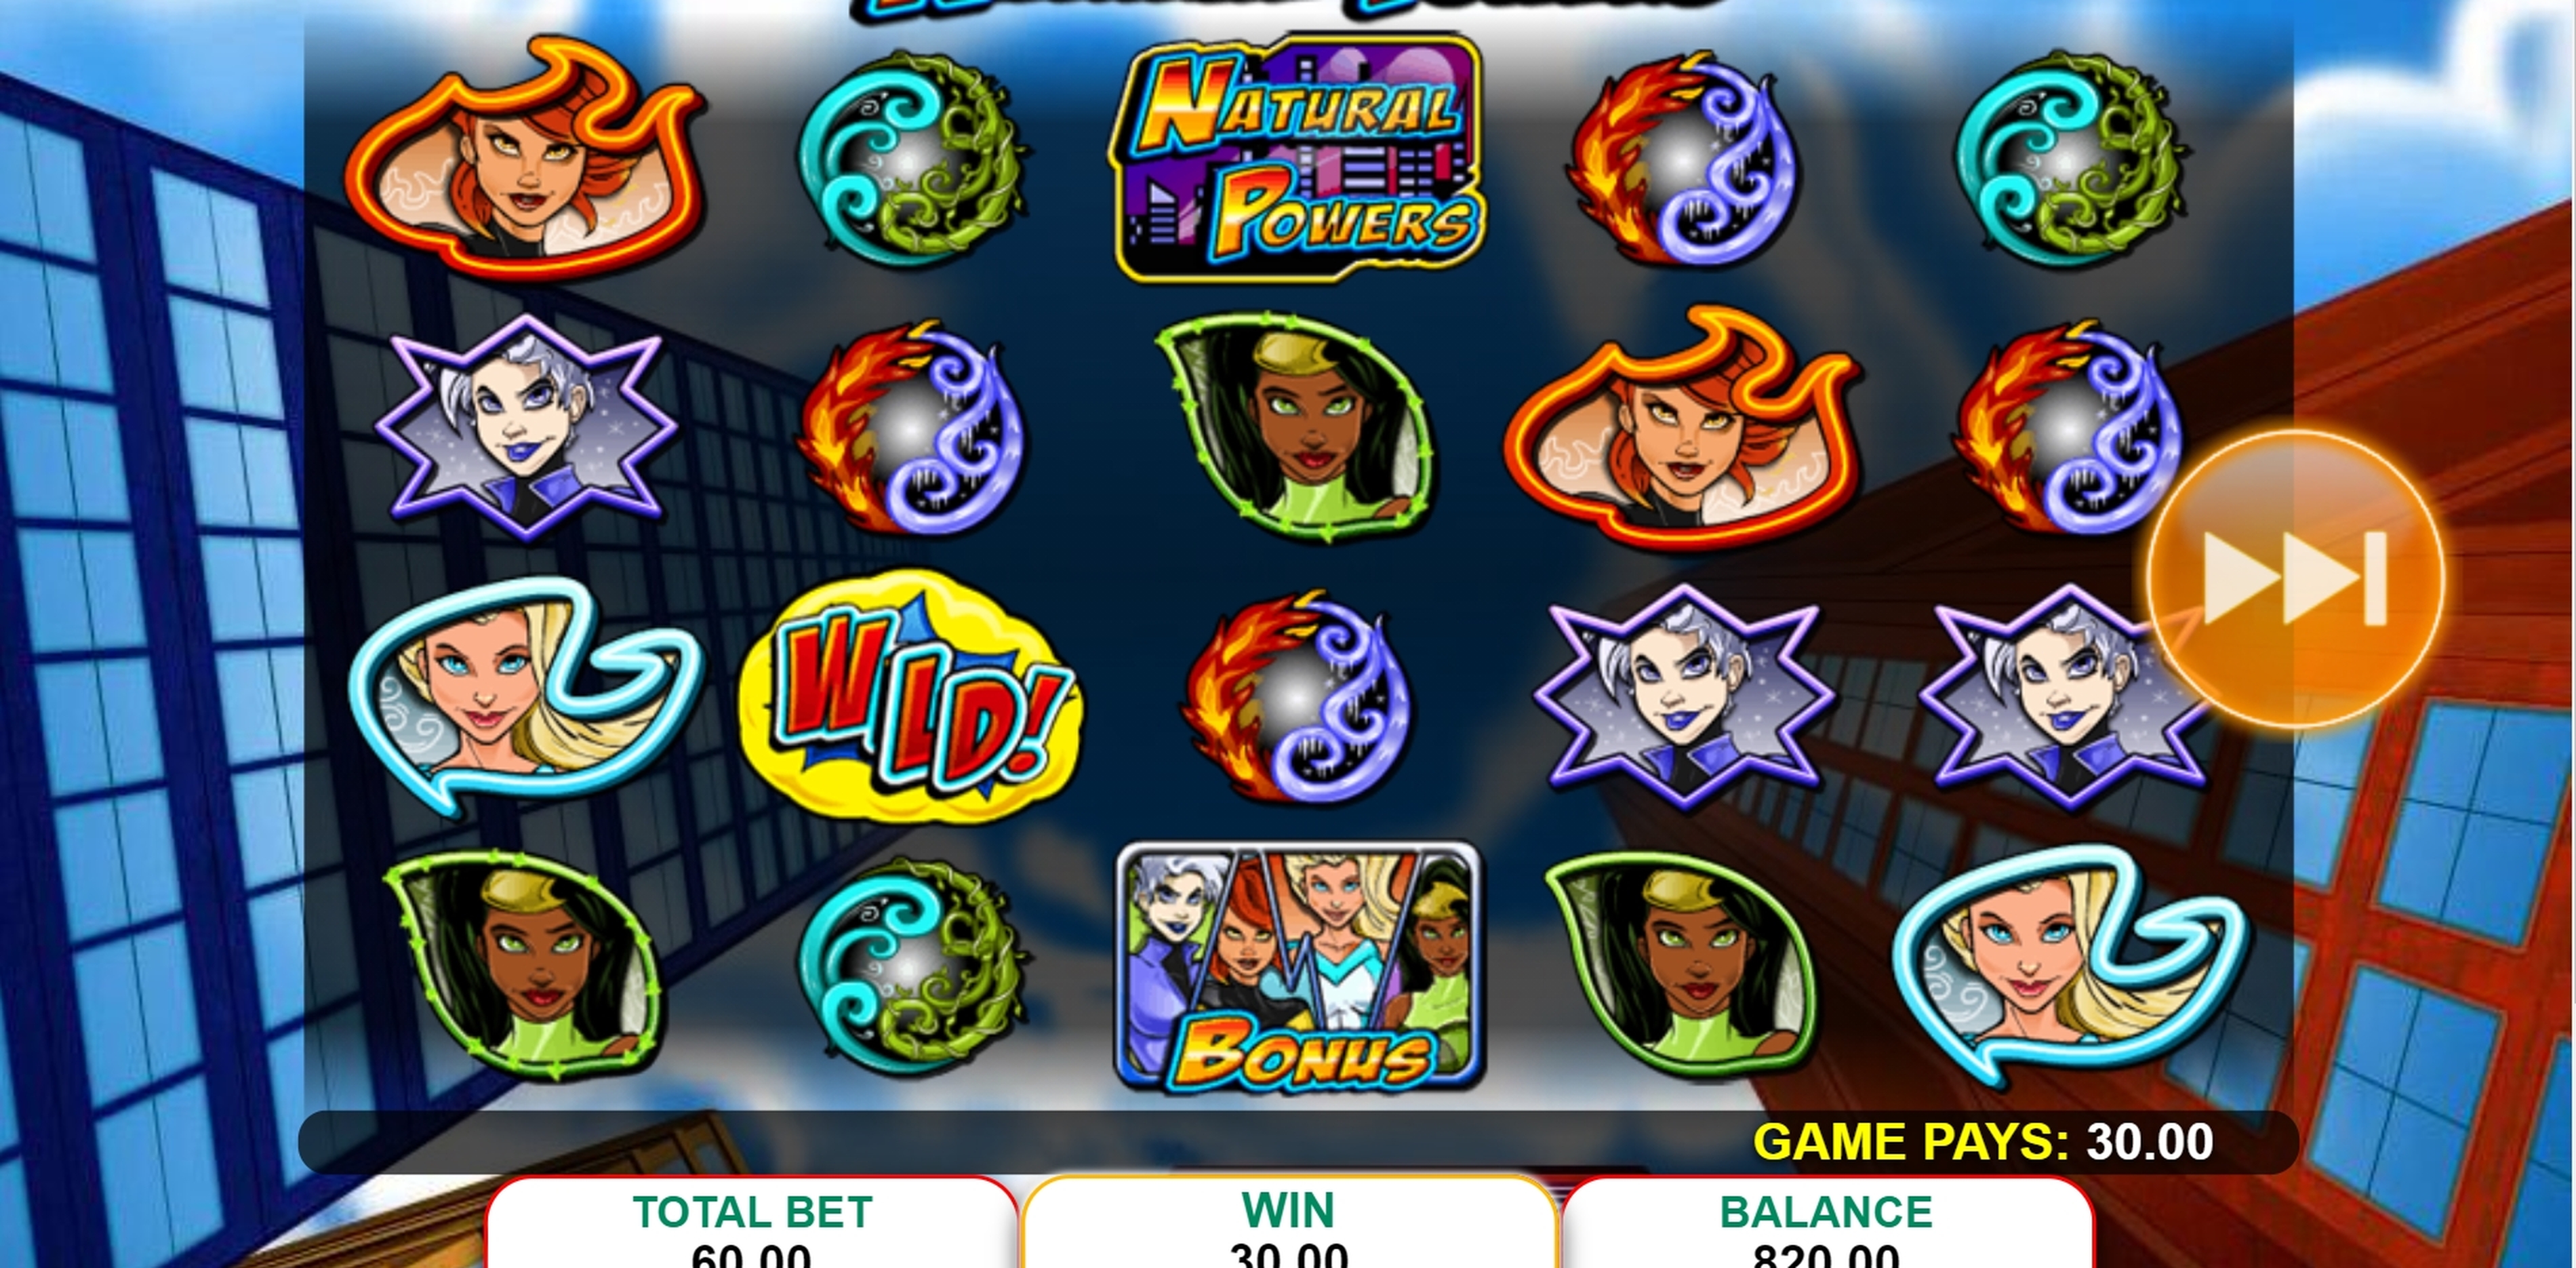 Win Money in Natural Powers Free Slot Game by IGT